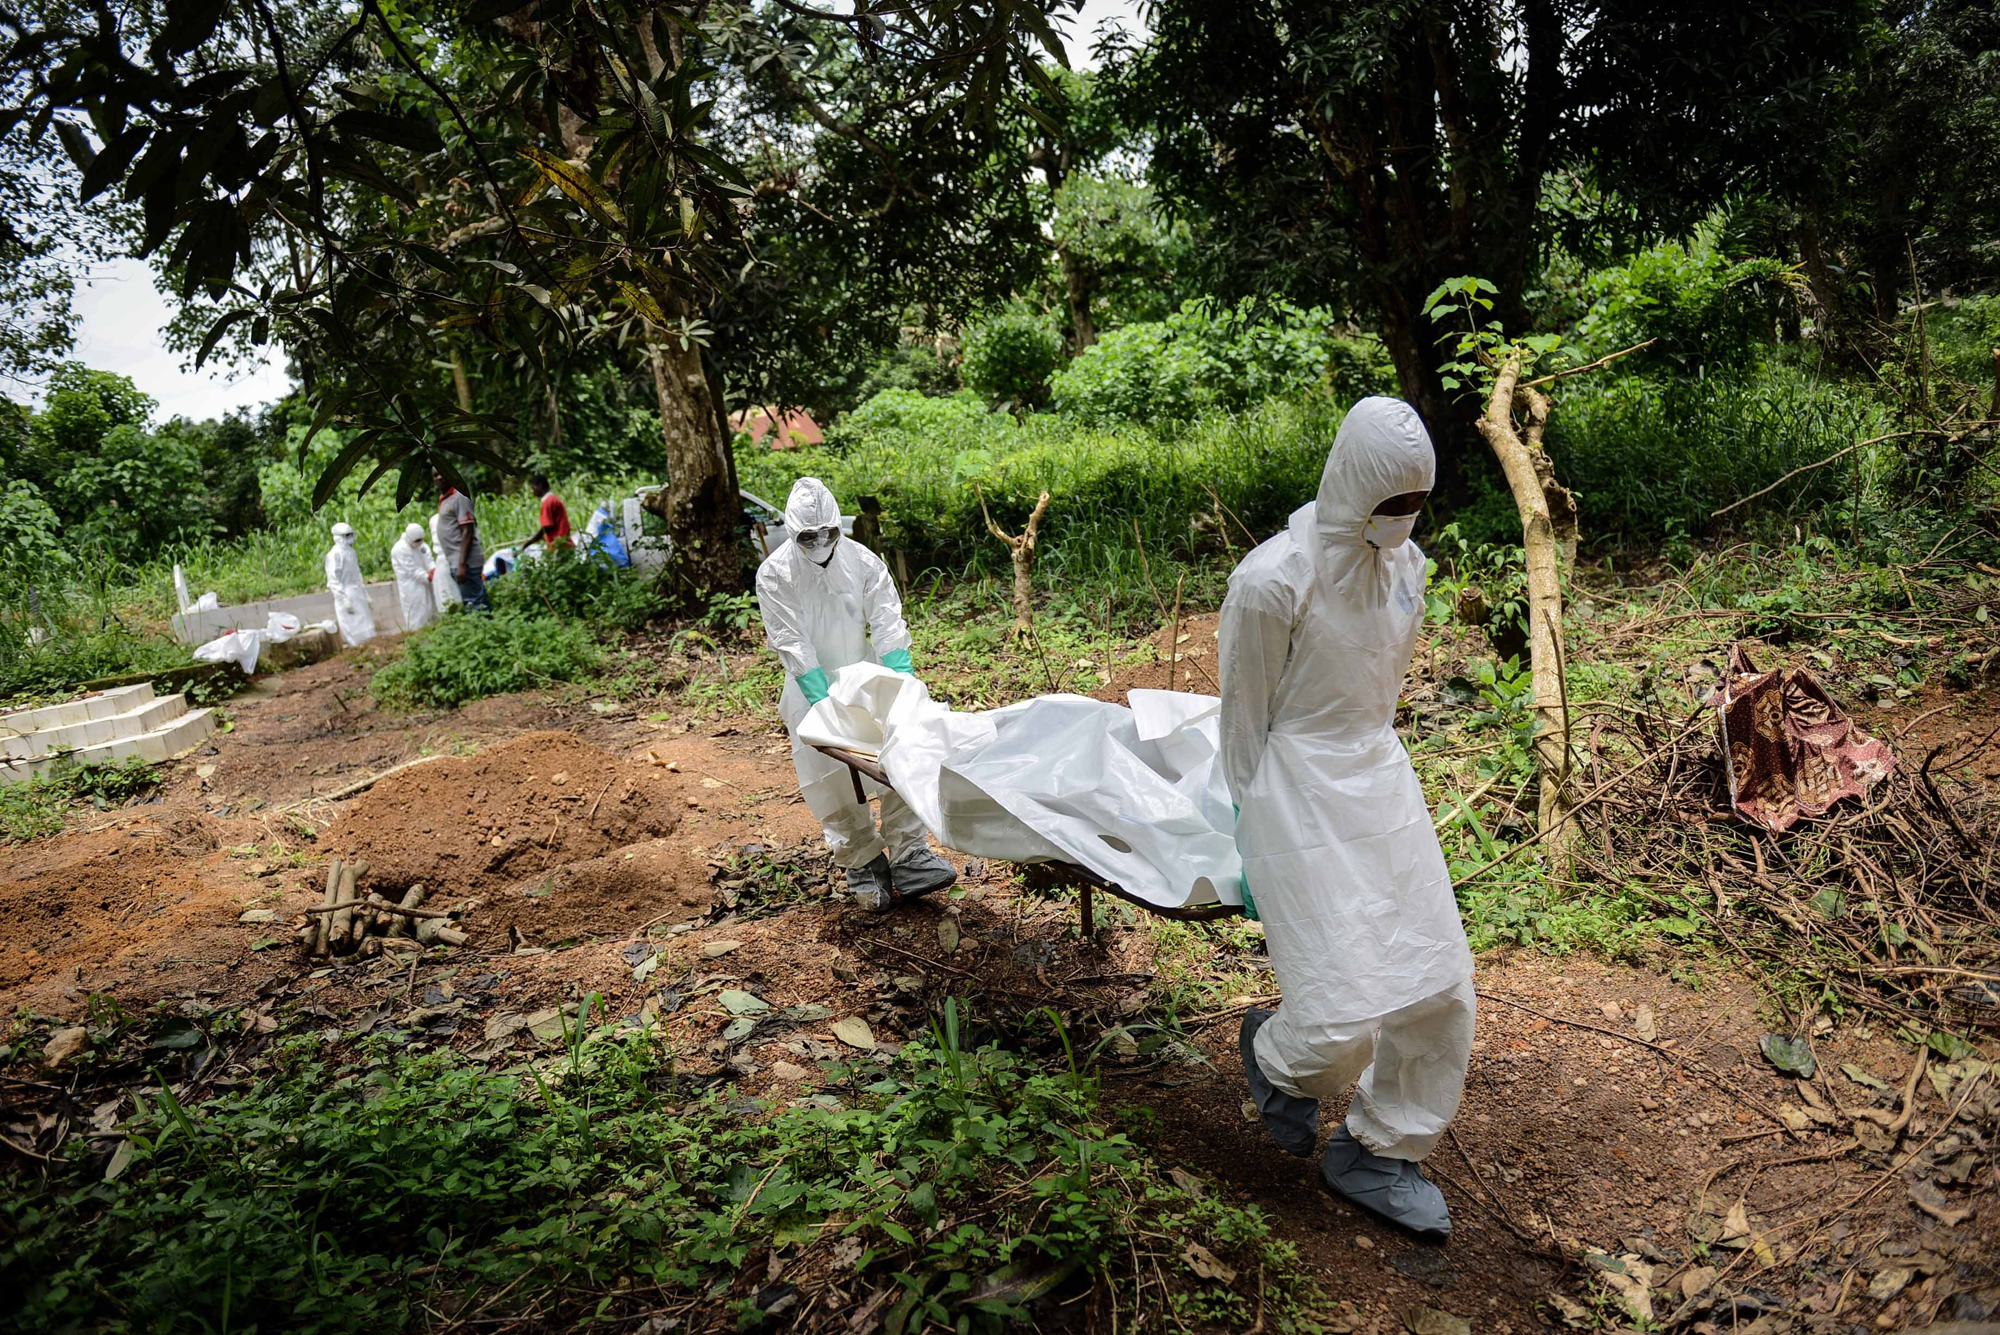 A group of young volunteers wear special uniforms for the burial of Ebola victims in Kenema, Sierra Leone on Aug. 24, 2014.